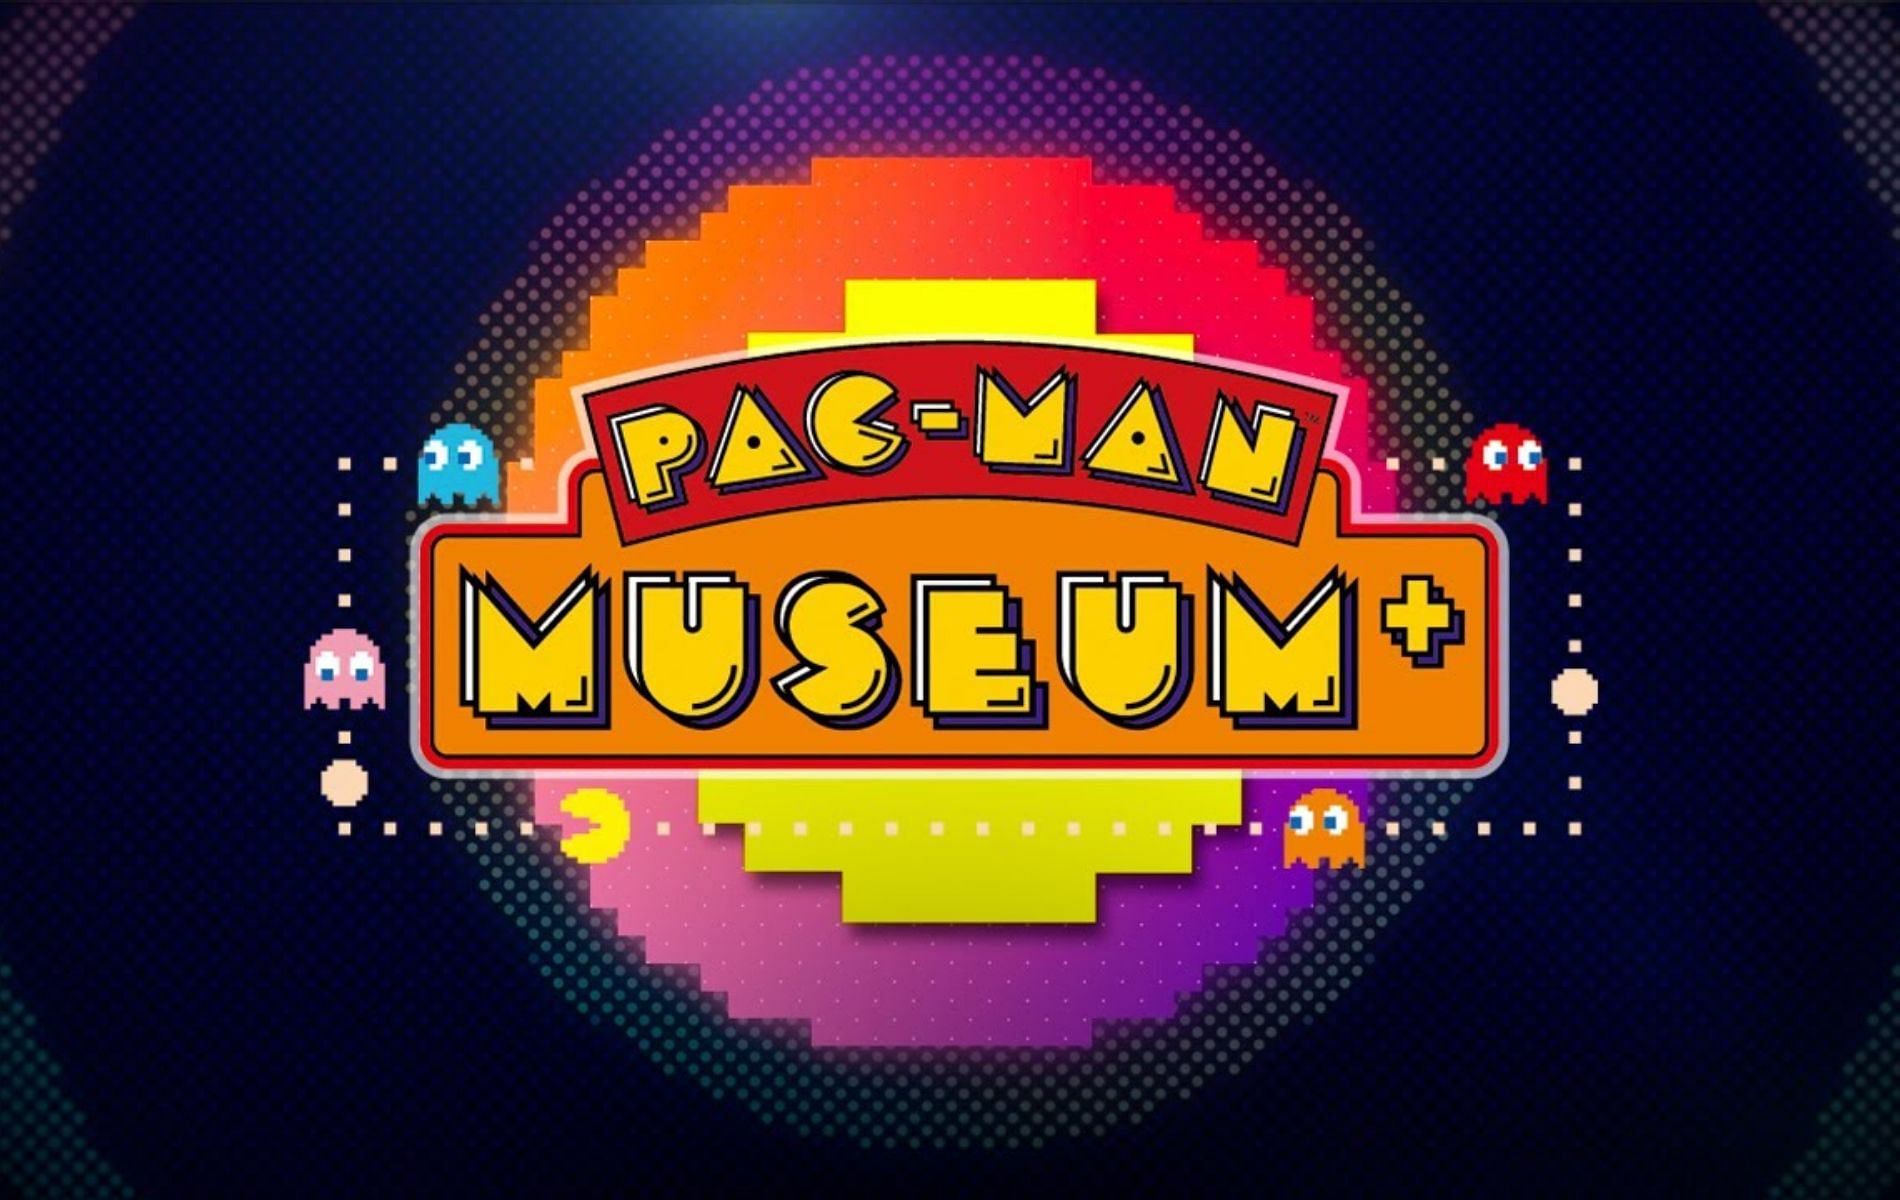 Pac-Man Museum + brings some of the best Pac-Man games to the modern generation (image by Bandai Namco)